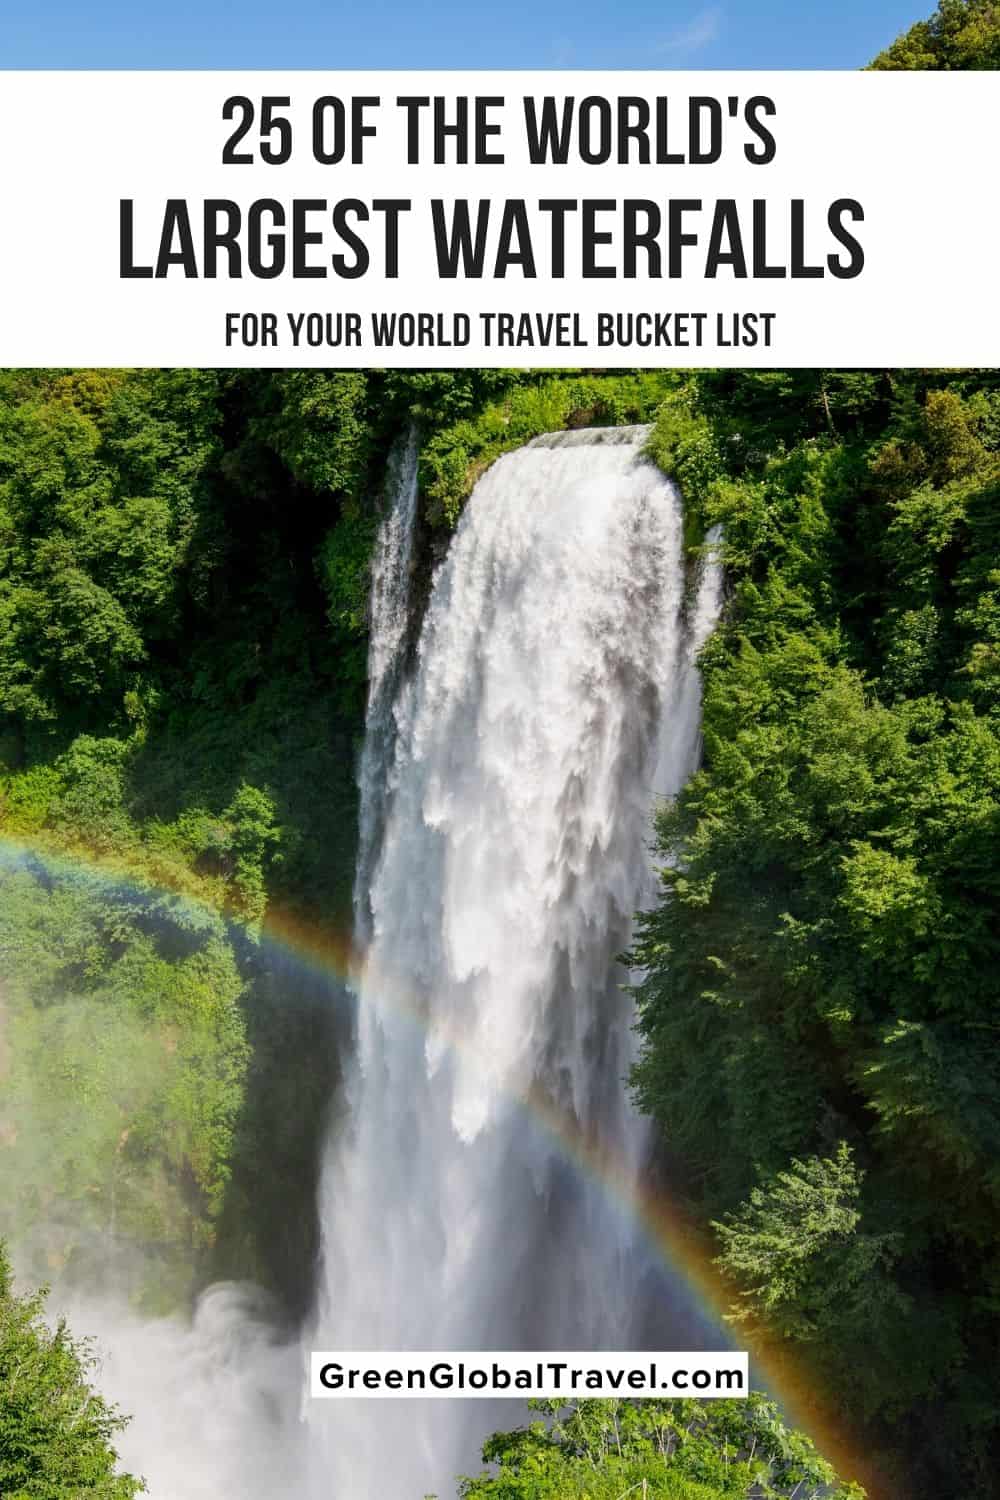 The 25 Biggest Waterfalls in the World (By Continent), including the highest waterfalls, largest waterfalls by volume, and biggest drops | Biggest Waterfalls in Africa | Biggest Waterfalls in Antarctica | Biggest Waterfalls in Asia | Biggest Waterfalls in Europe | Biggest Waterfalls in North America | Biggest Waterfalls in South America | largest waterfall in europe | tallest waterfall in north america | tallest waterfall in us | biggest waterfall in the world | largest waterfall in the world